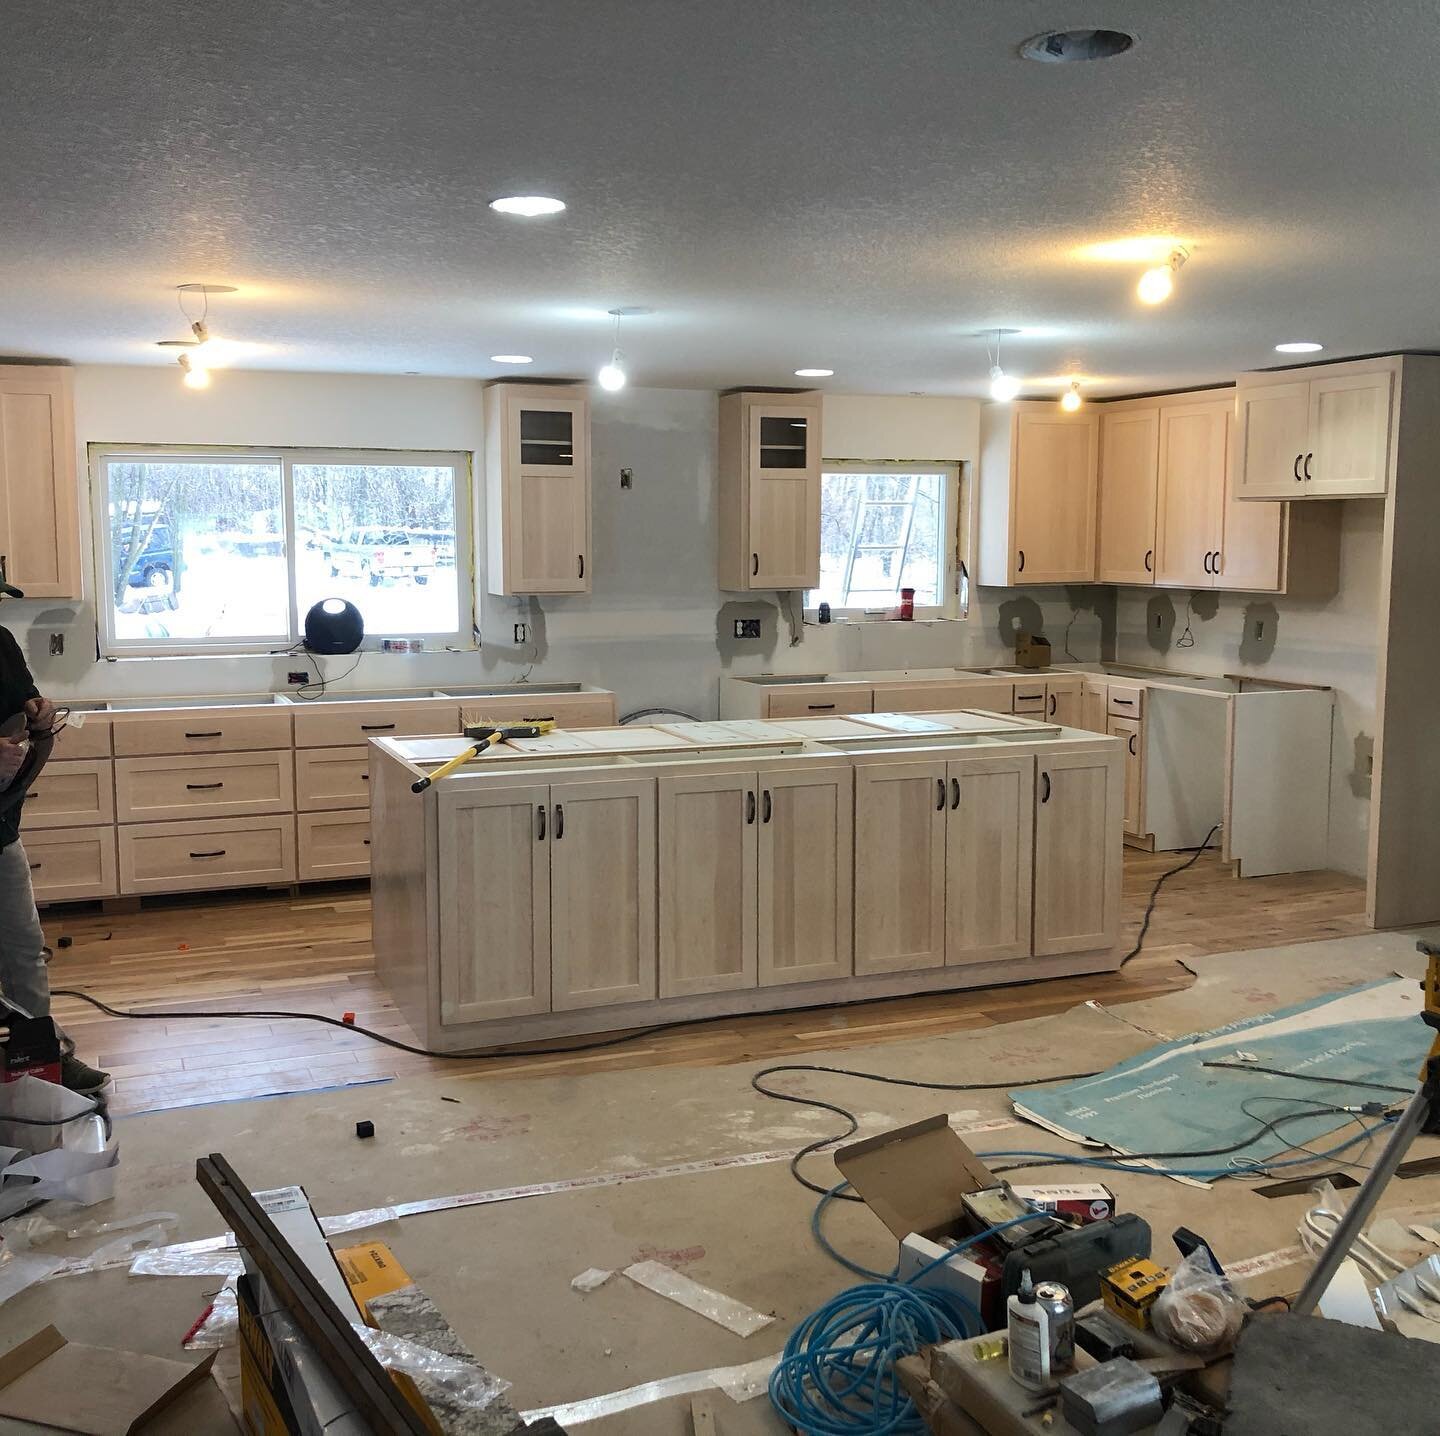 Kitchen and vanity&rsquo;s are in it&rsquo;s probably the most exciting part of a job. Then turned out beautiful white stain on maple in the kitchen and same stain on 1/4 sawn white oak for bathrooms